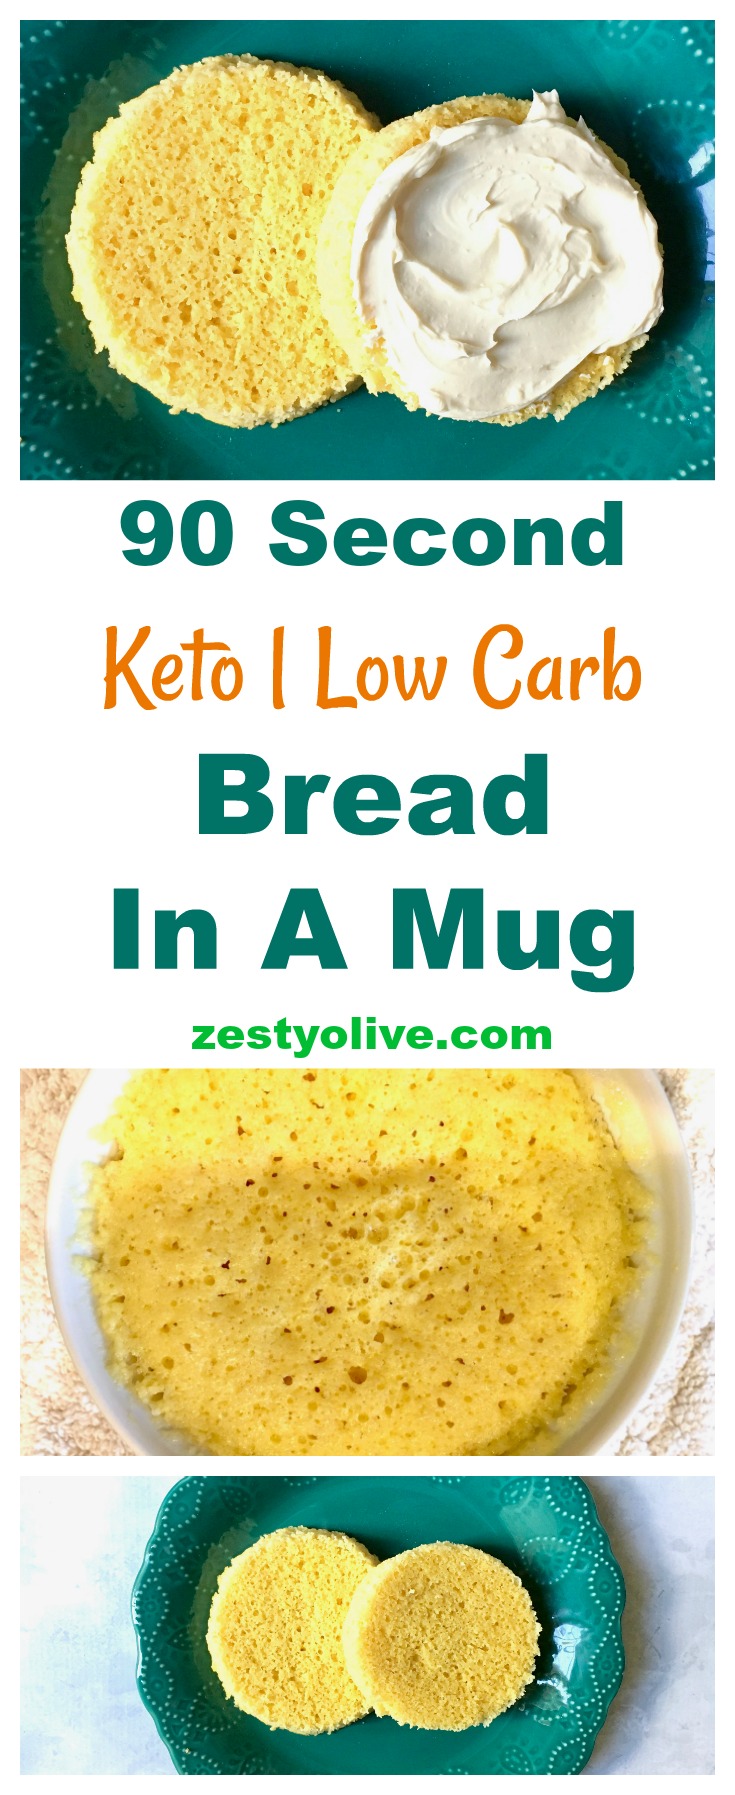 Here's the easiest recipe ever on How To Make 90-Second Keto, Low Carb, Gluten-Free Bread In A Mug. Not only is this bread healthy and quick to make, but it is easily customizable if you want to season it up with herbs or cheese.